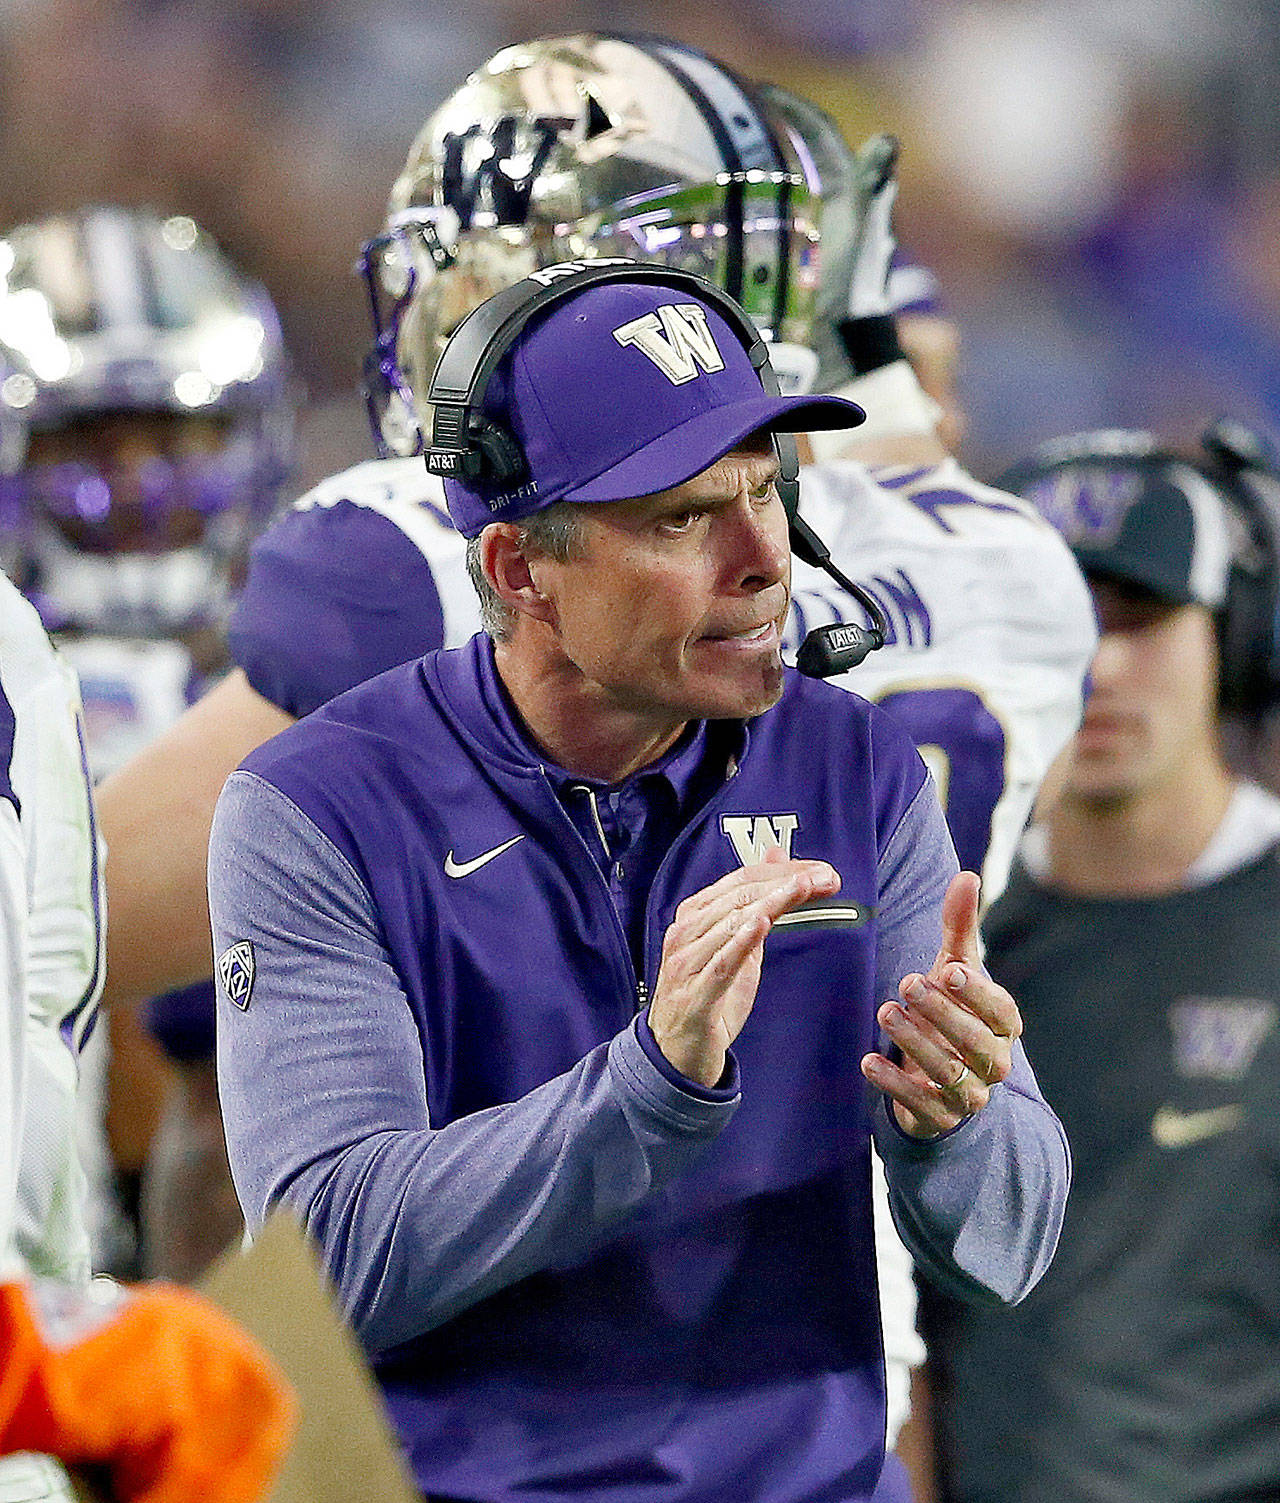 Washington football coach Chris Petersen applauds on the sideline during the Huskies’ Fiesta Bowl loss to Penn State on Dec. 30, 2017 in Glendale, Ariz. Petersen and the Huskies have brought in a banner recruiting class for next season. (AP Photo/Ross D. Franklin)